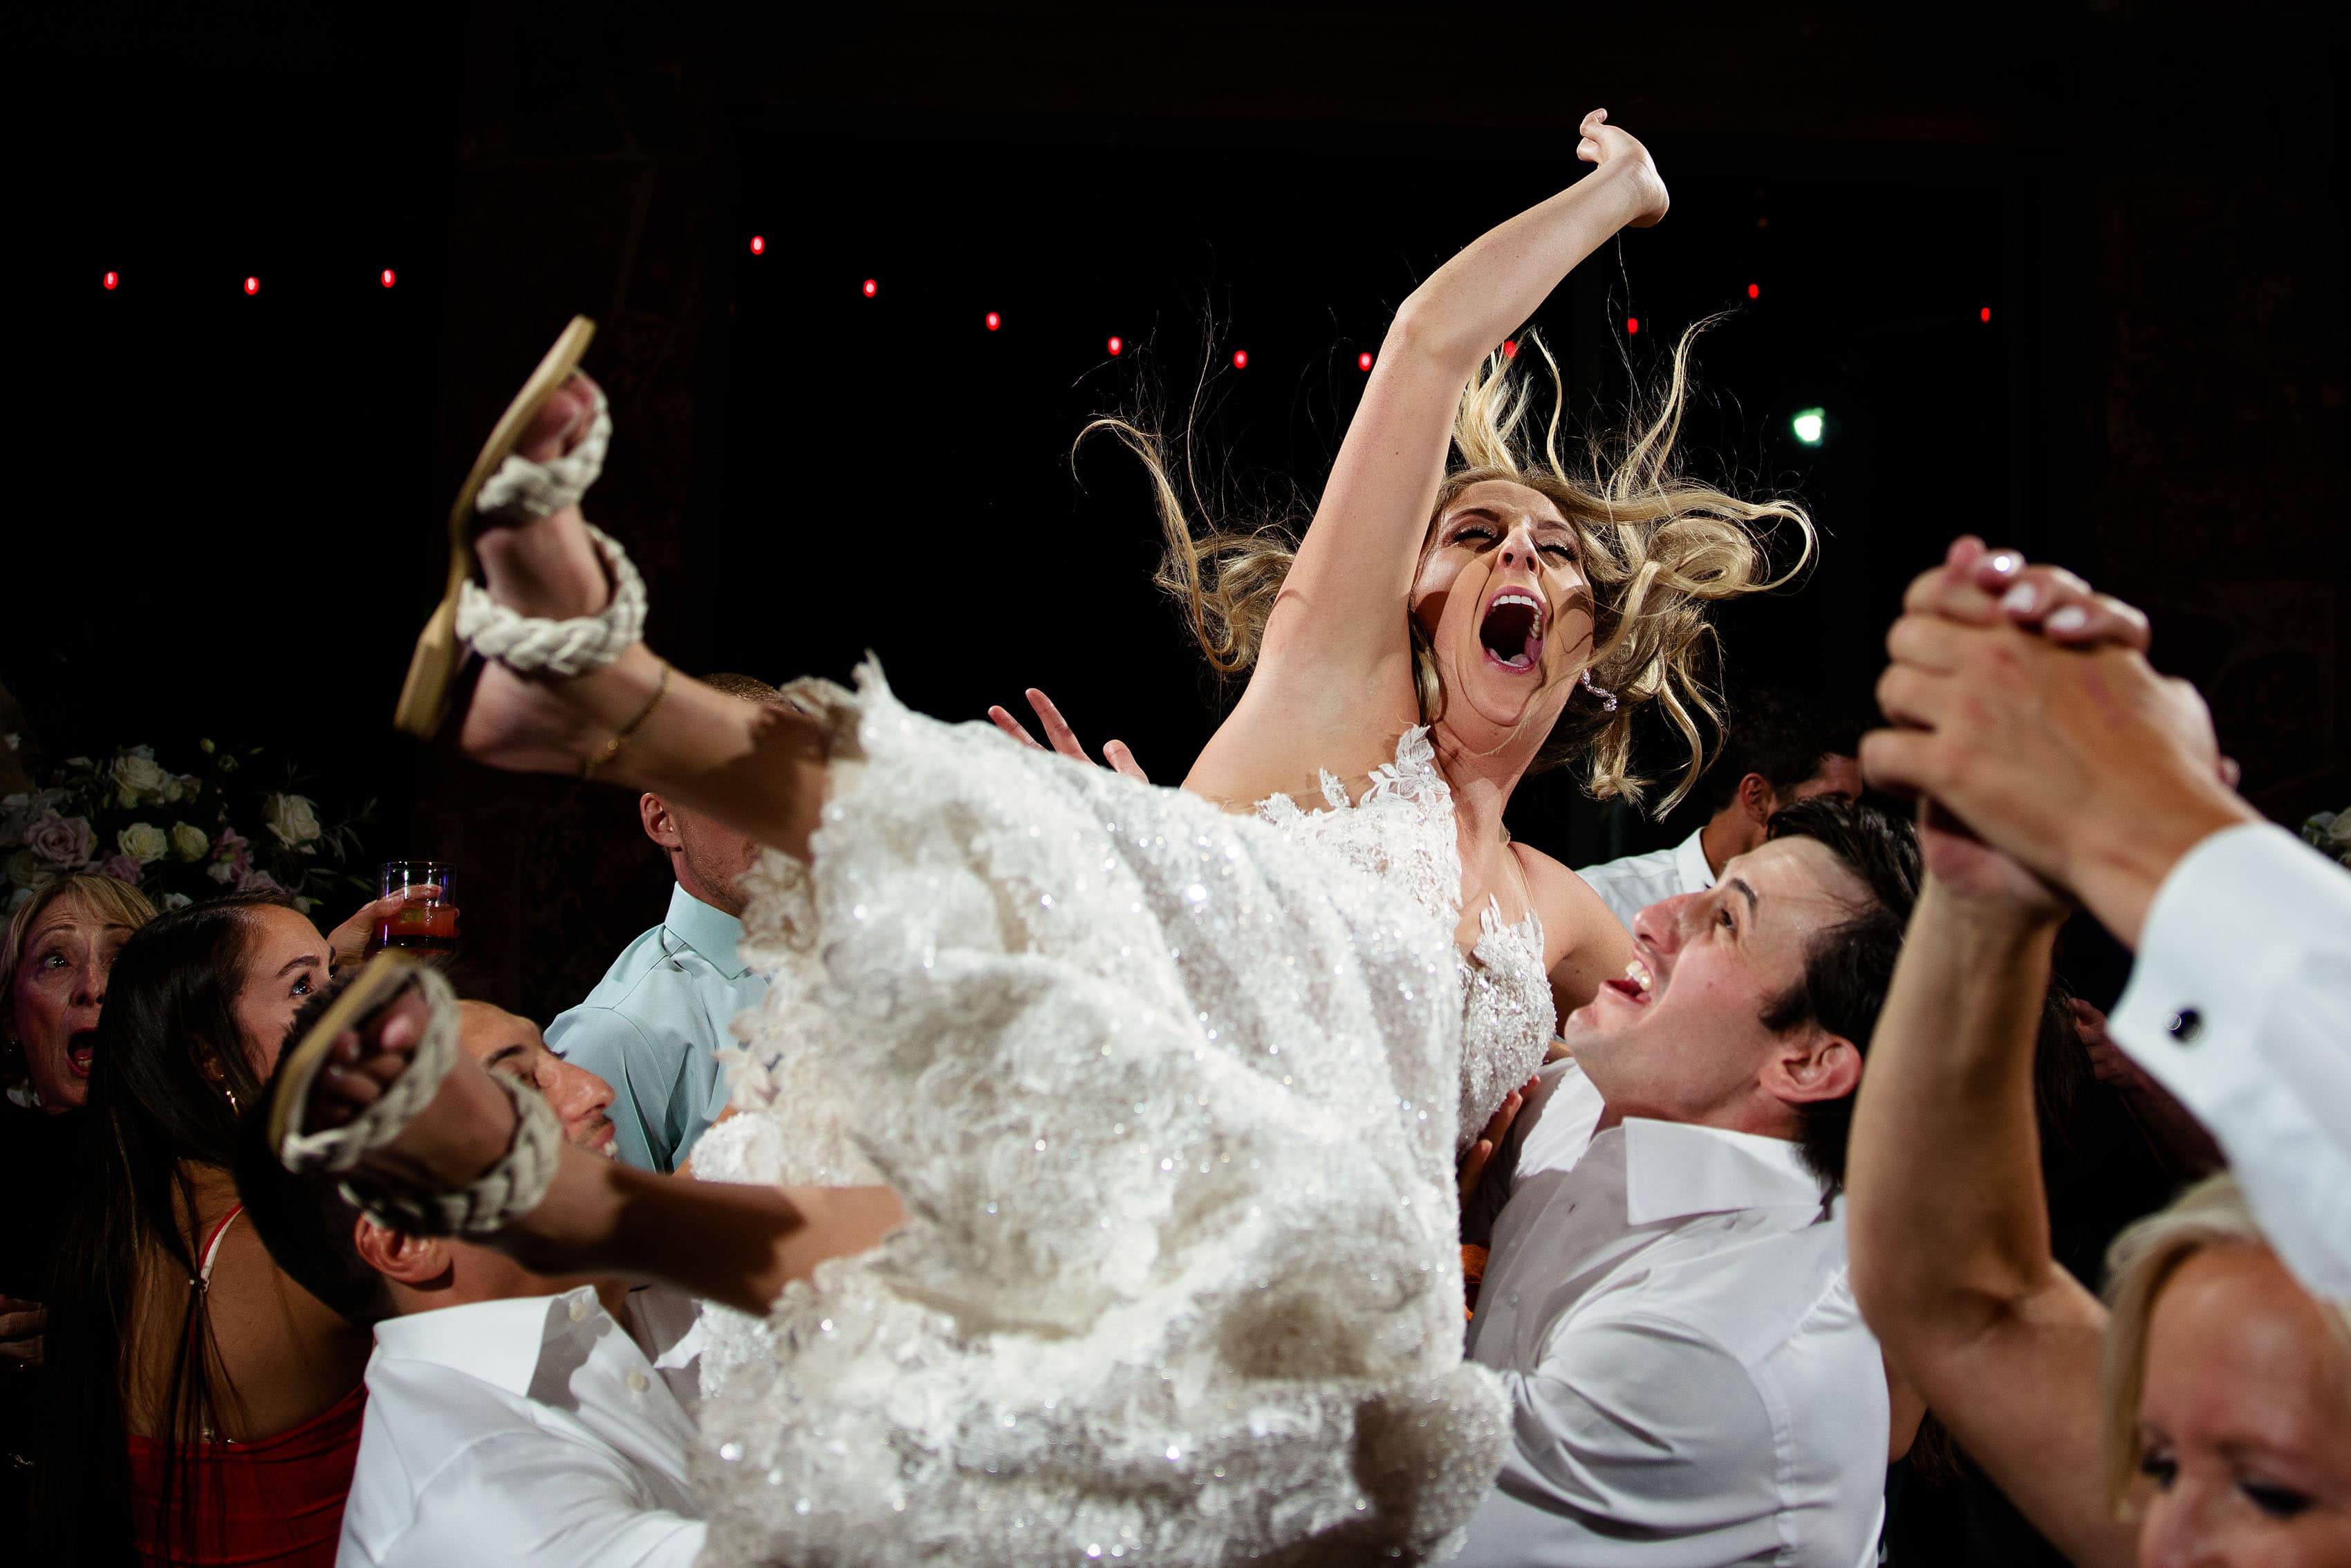 The bride is thrown into the air by friends during the reception